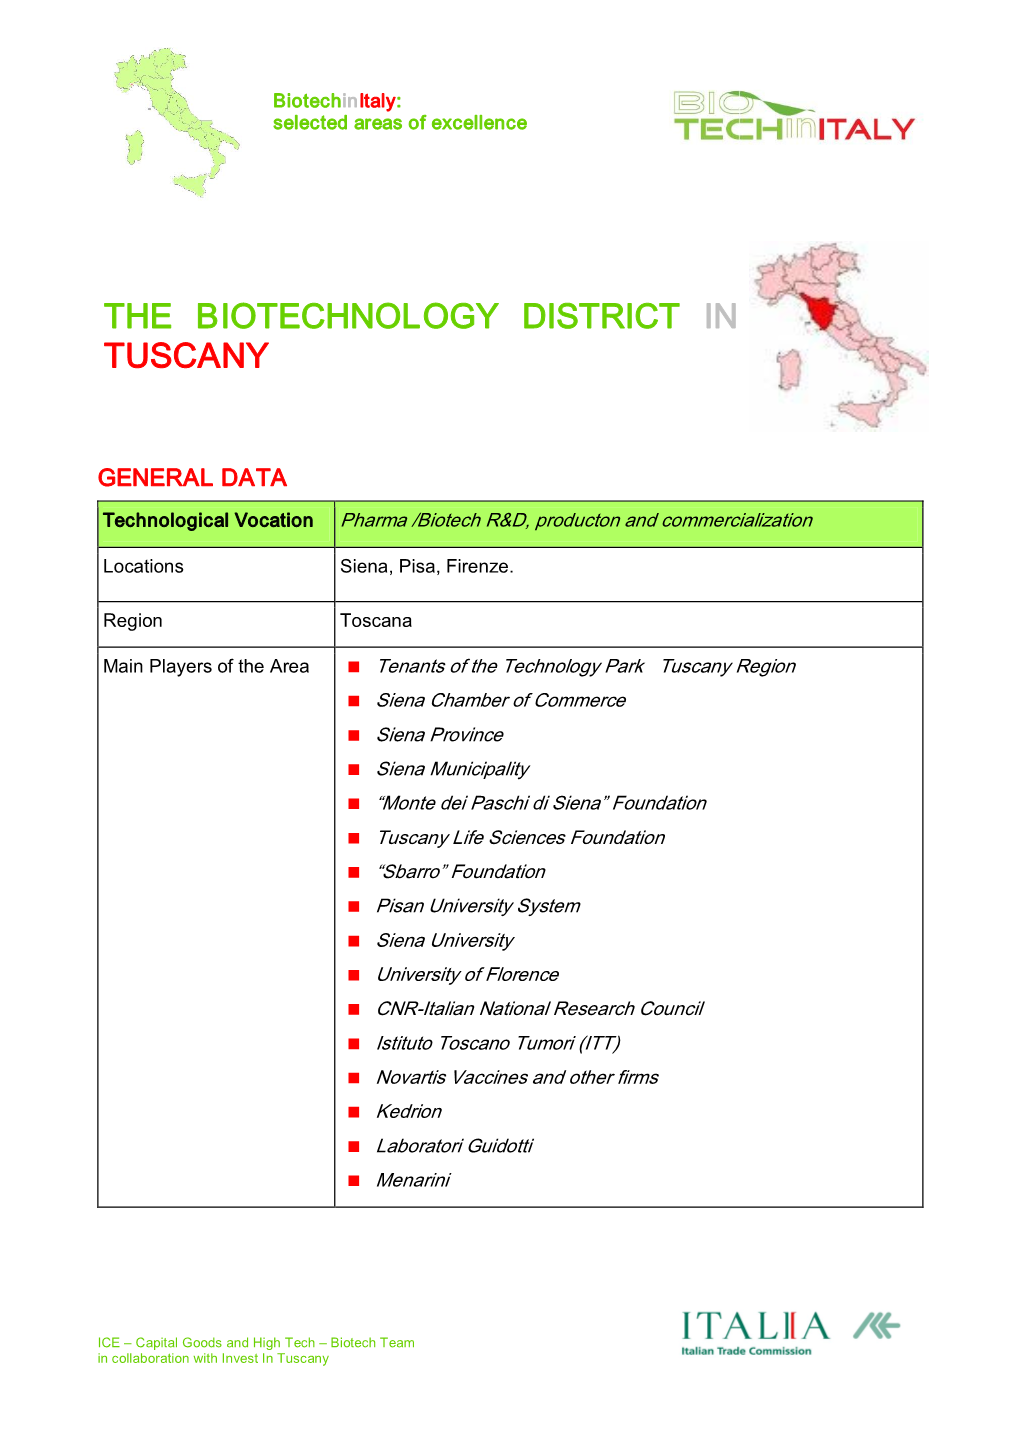 The Biotechnology District in Tuscany